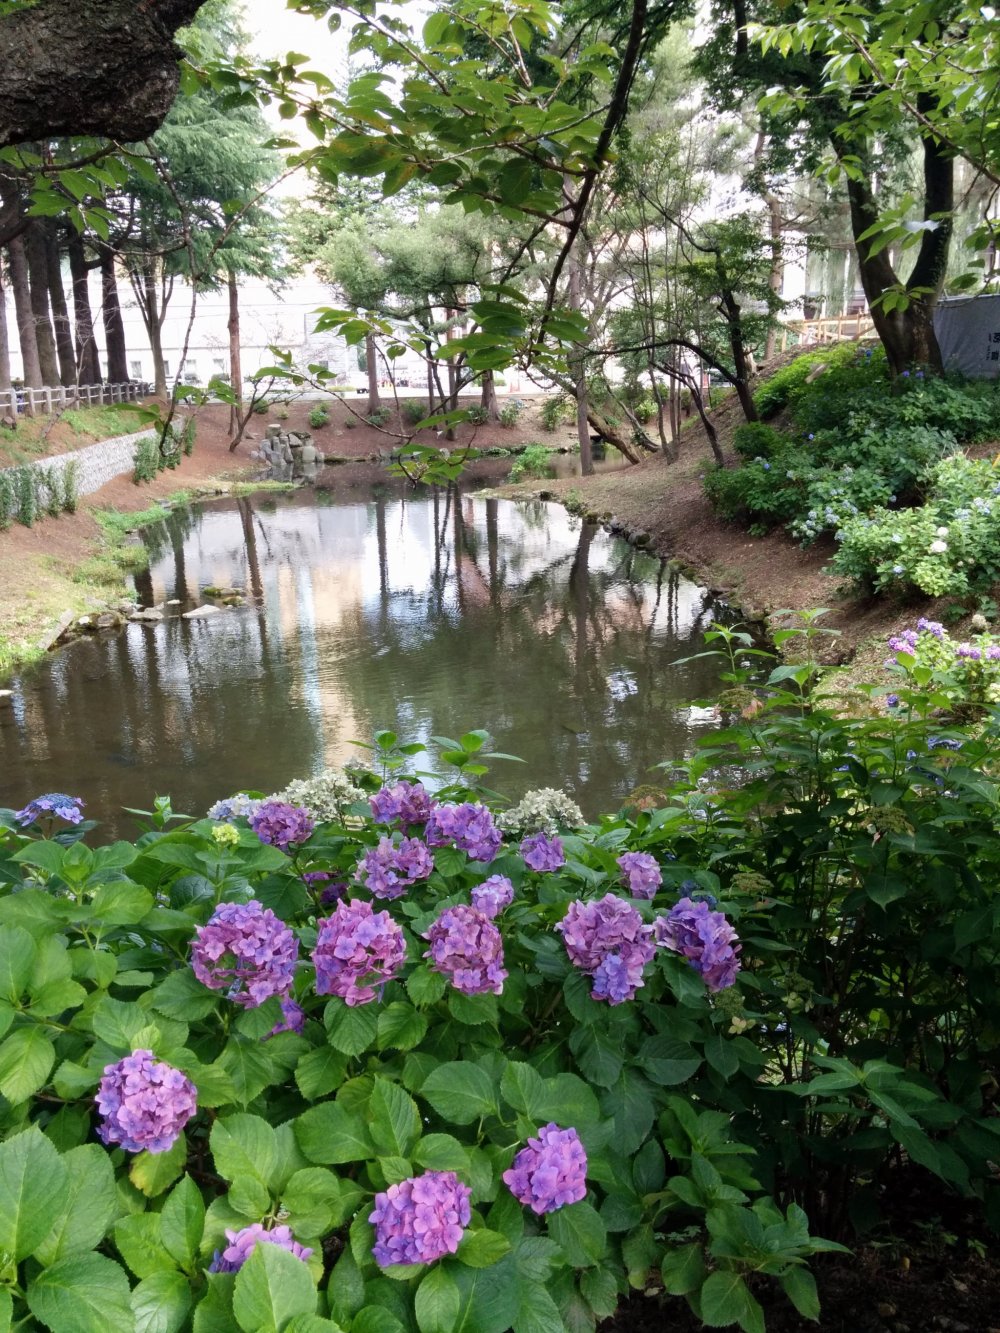 Remains of the moat with a foreground of hydrangea flowers